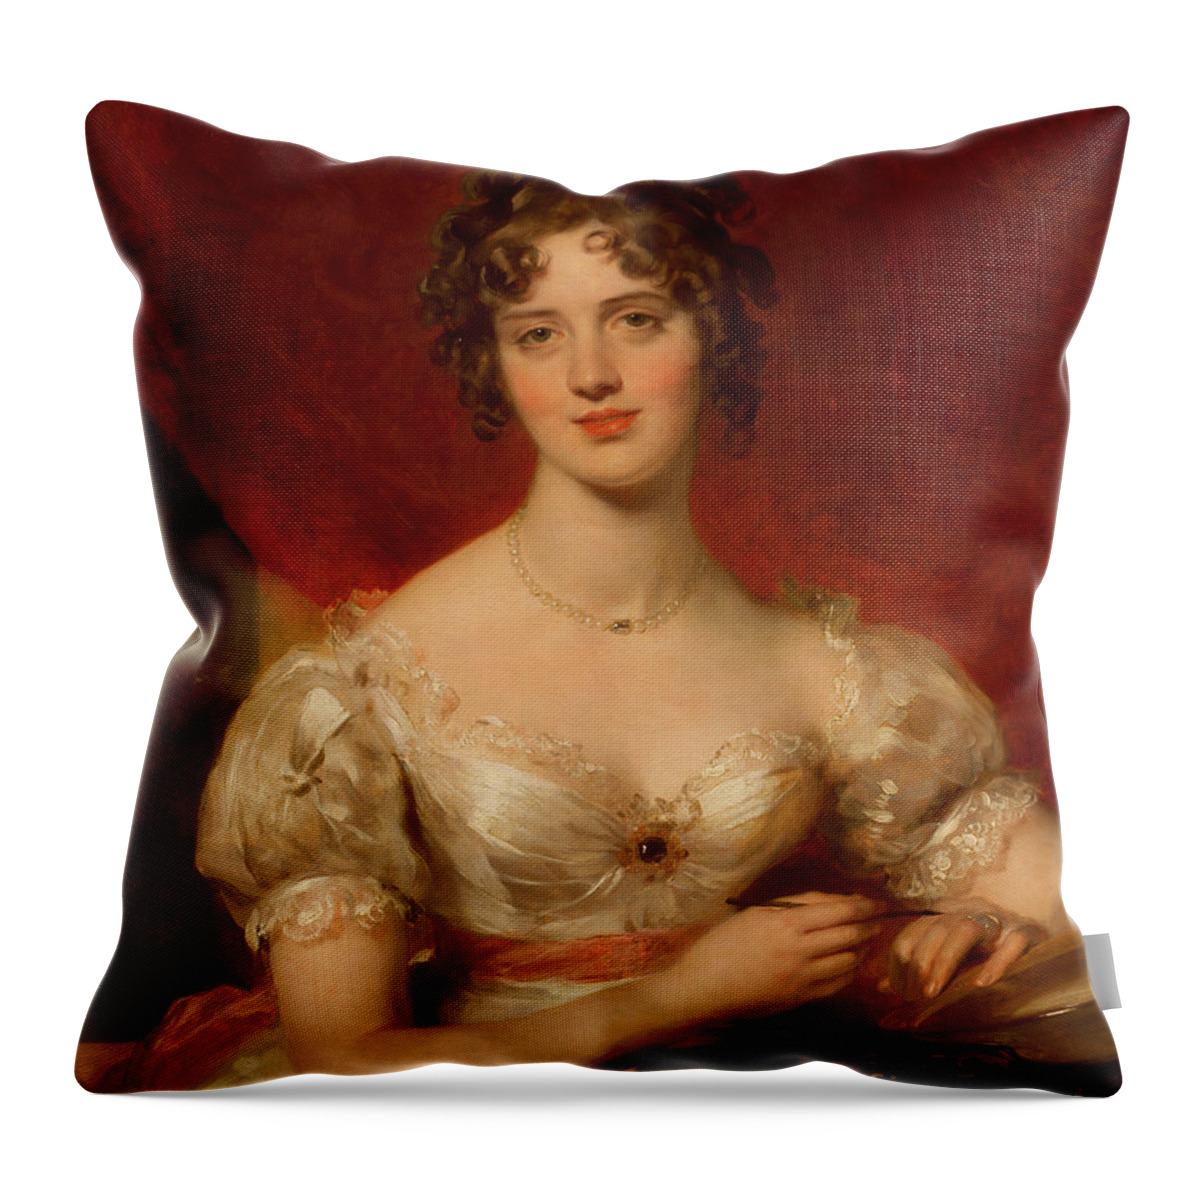 Portrait Of Mary Anne Bloxam Throw Pillow featuring the painting Portrait of Mary Anne Bloxam by Thomas Lawrence